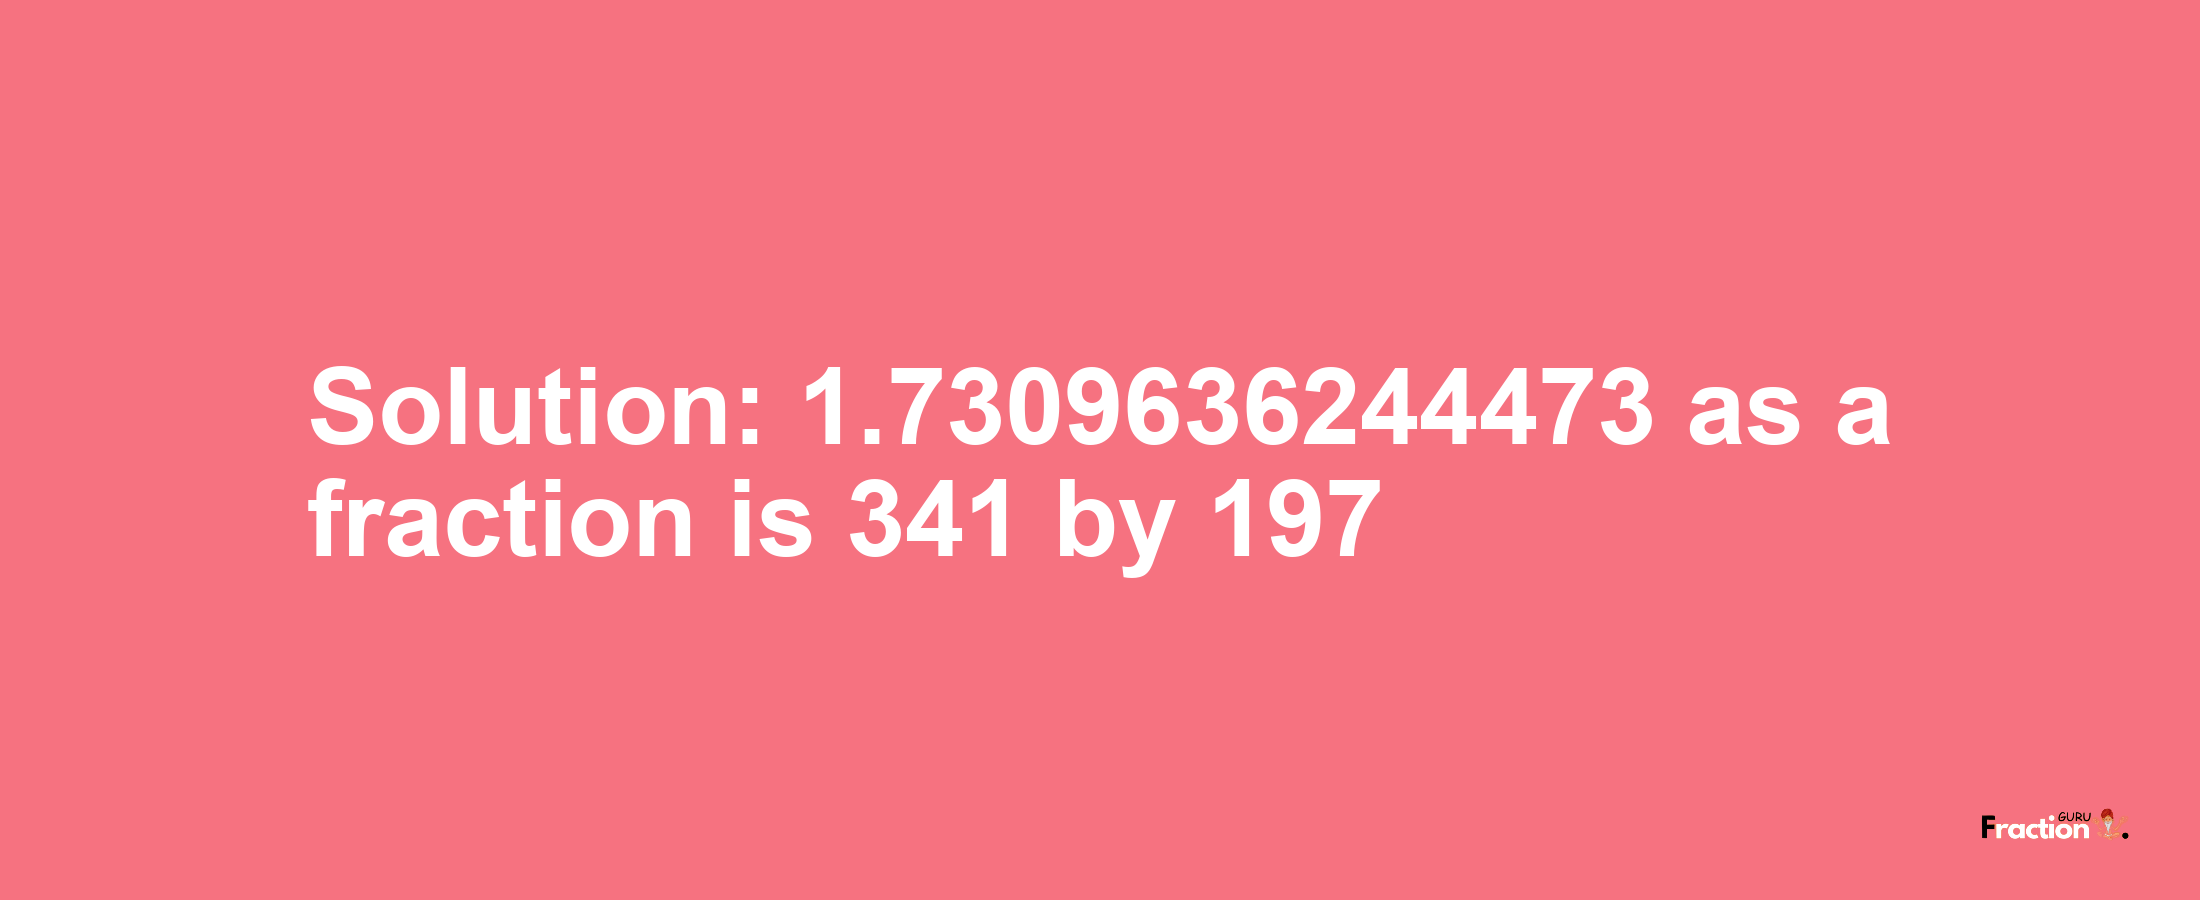 Solution:1.7309636244473 as a fraction is 341/197